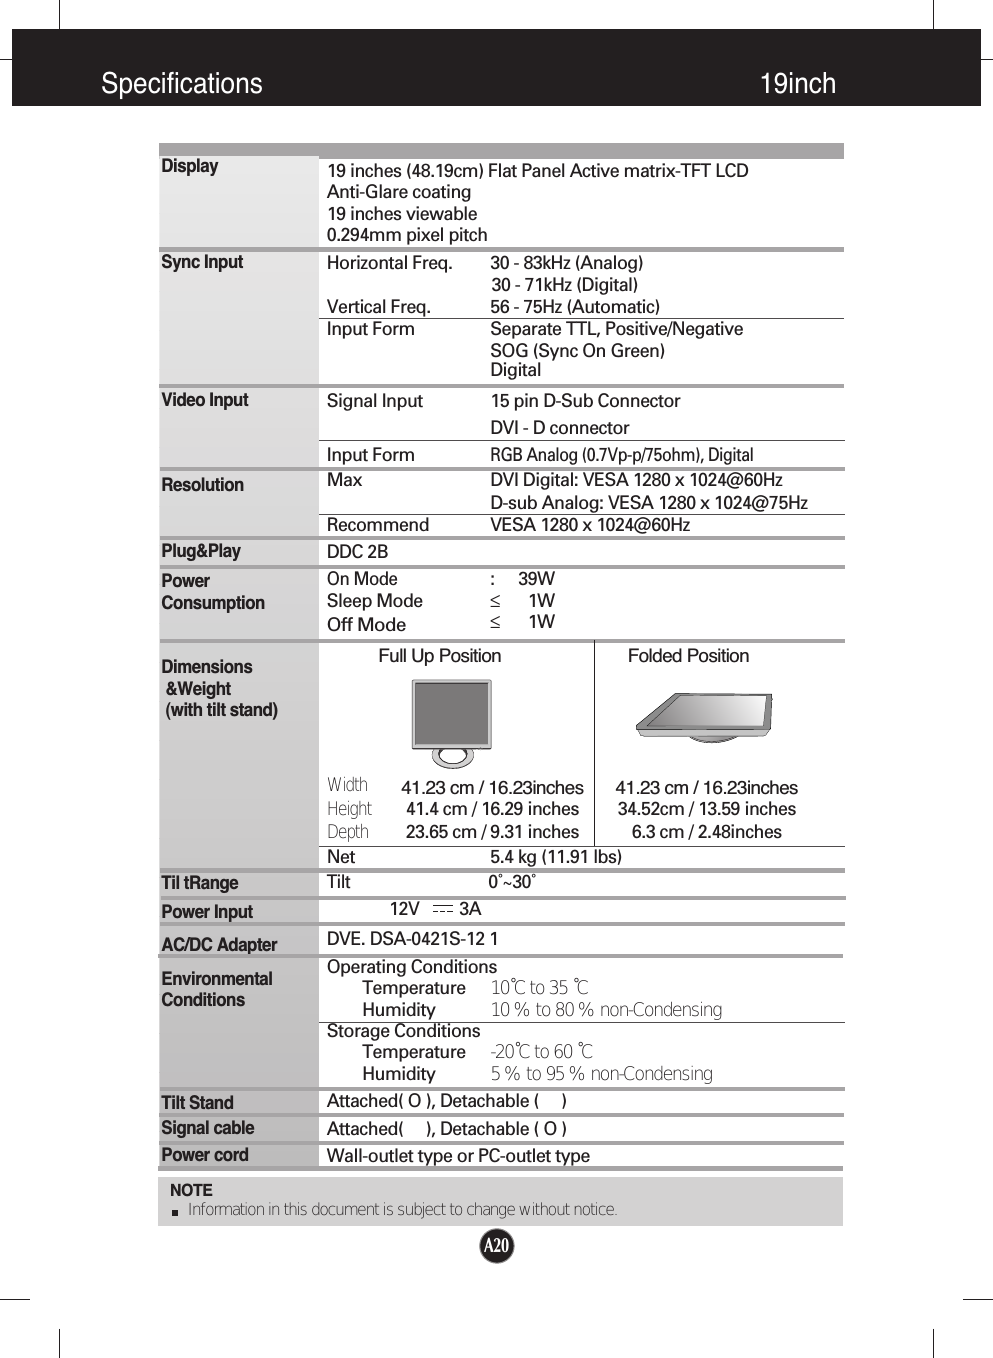 A20Specifications                                                                    19inchNOTEInformation in this document is subject to change without notice.19 inches (48.19cm) Flat Panel Active matrix-TFT LCD Anti-Glare coating19 inches viewable0.294mm pixel pitchHorizontal Freq. 30 - 83kHz (Analog)30 - 71kHz (Digital)Vertical Freq. 56 - 75Hz (Automatic)Input Form Separate TTL, Positive/NegativeSOG (Sync On Green) DigitalSignal Input 15 pin D-Sub ConnectorDVI - D connectorInput FormRGB Analog (0.7Vp-p/75ohm), DigitalMax DVI Digital: VESA 1280 x 1024@60Hz D-sub Analog: VESA 1280 x 1024@75HzRecommend VESA 1280 x 1024@60HzDDC 2BOn Mode :39WSleep Mode ≤1WOff Mode≤1WFull Up Position Folded PositionWidth41.23 cm / 16.23inches 41.23 cm / 16.23inchesHeight41.4 cm / 16.29 inches 34.52cm / 13.59 inchesDepth23.65 cm / 9.31 inches 6.3 cm / 2.48inchesNet 5.4 kg (11.91 lbs)Tilt0˚~30˚12V         3ADVE. DSA-0421S-12 1Operating ConditionsTemperature 10˚C to 35 ˚CHumidity 10 % to 80 % non-CondensingStorage ConditionsTemperature -20˚C to 60 ˚CHumidity 5 % to 95 % non-CondensingAttached( O ), Detachable (     )Attached(     ), Detachable ( O )Wall-outlet type or PC-outlet typeDisplaySync InputVideo InputResolutionPlug&amp;PlayPowerConsumptionDimensions&amp;Weight(with tilt stand)Til tRangePower InputAC/DC AdapterEnvironmentalConditionsTilt StandSignal cablePower cord